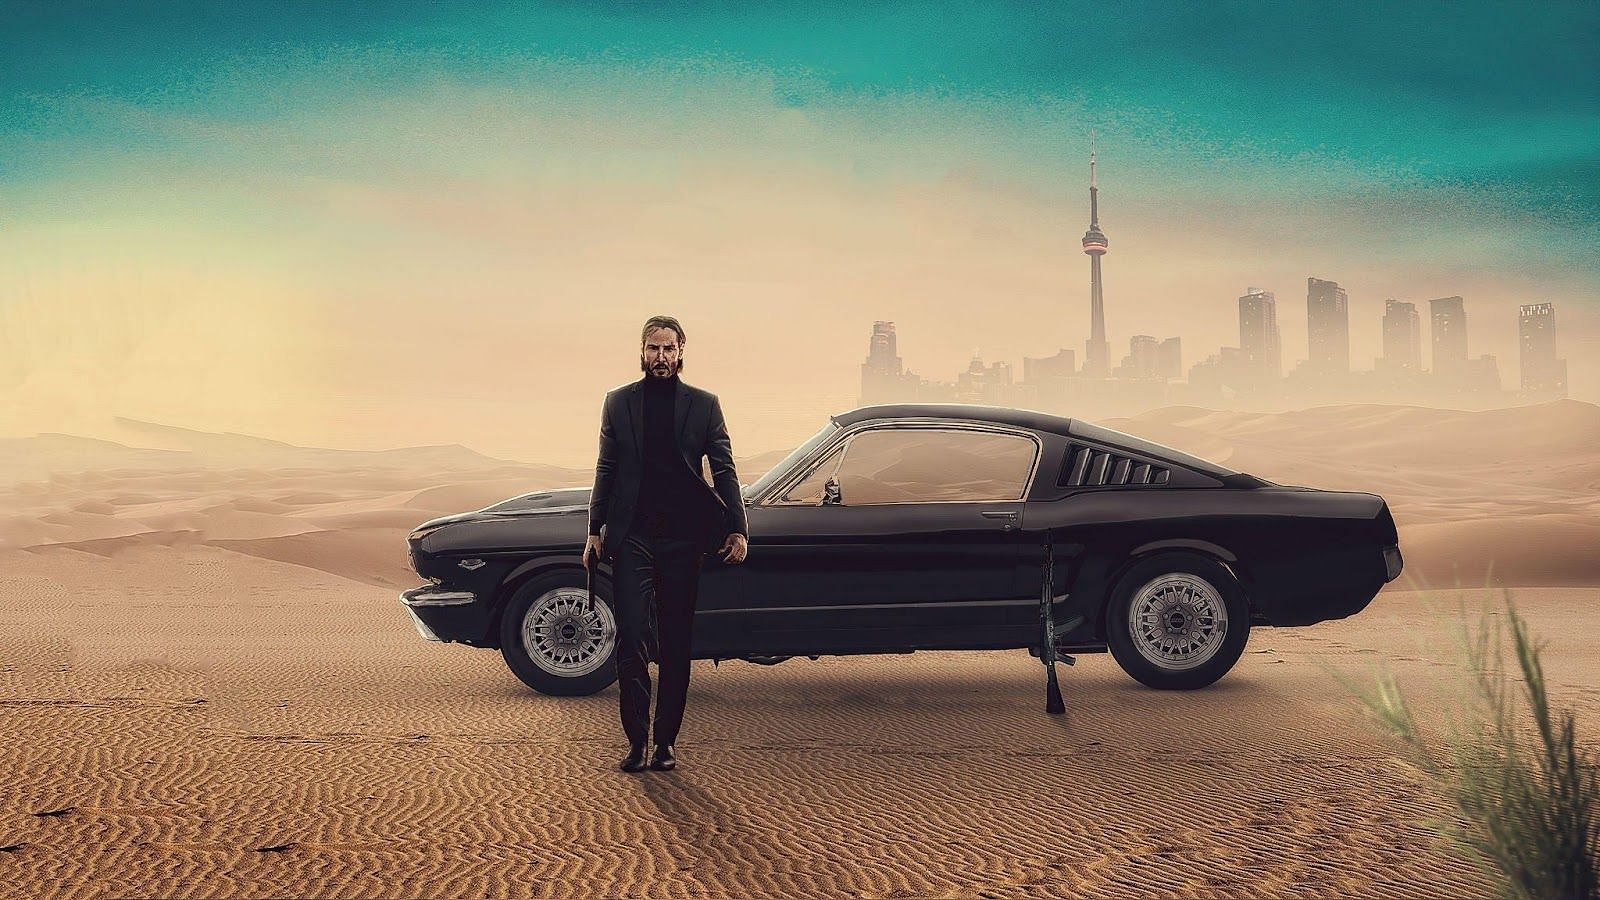 Which Is John Wick'S Mustang?